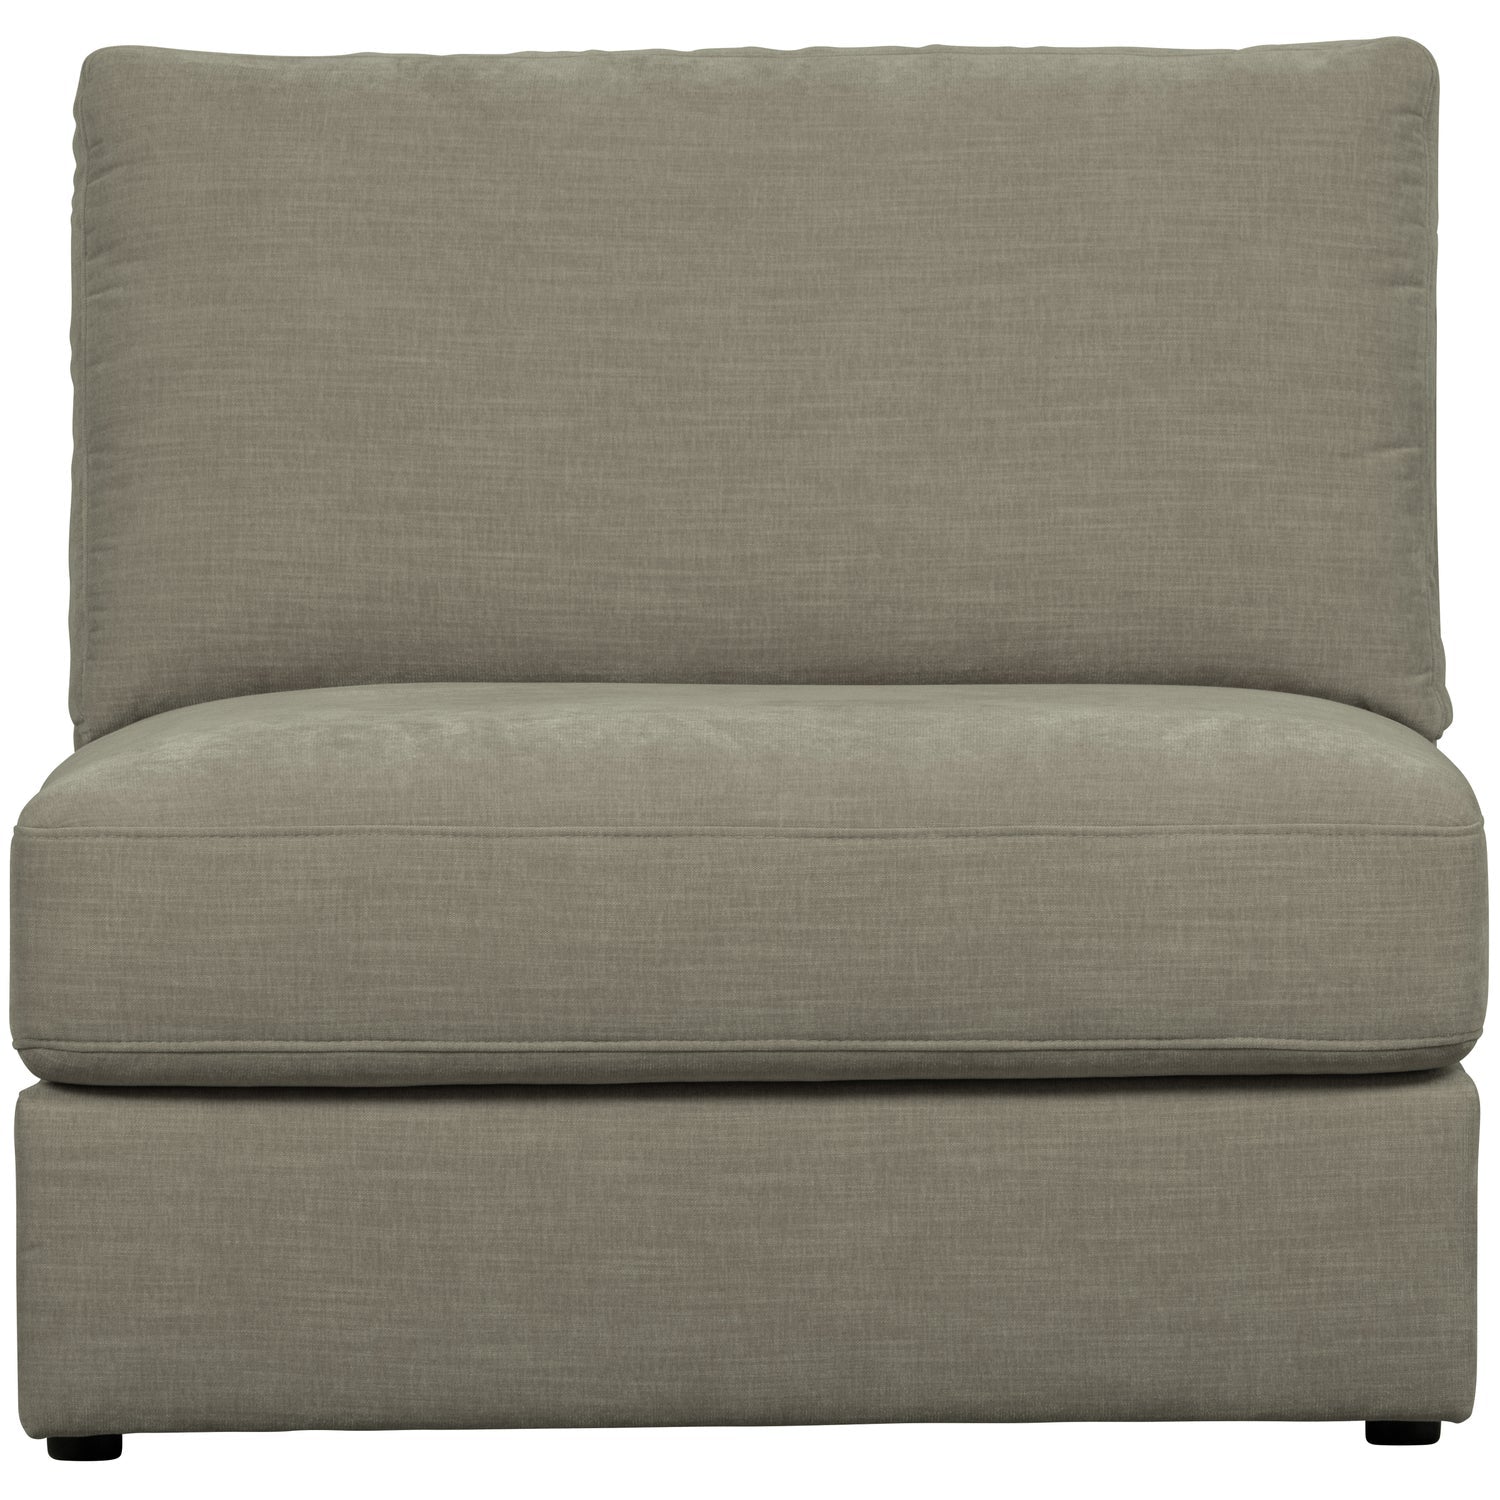 FAMILY 1-SEAT ELEMENT WITHOUT ARM WARM GREY